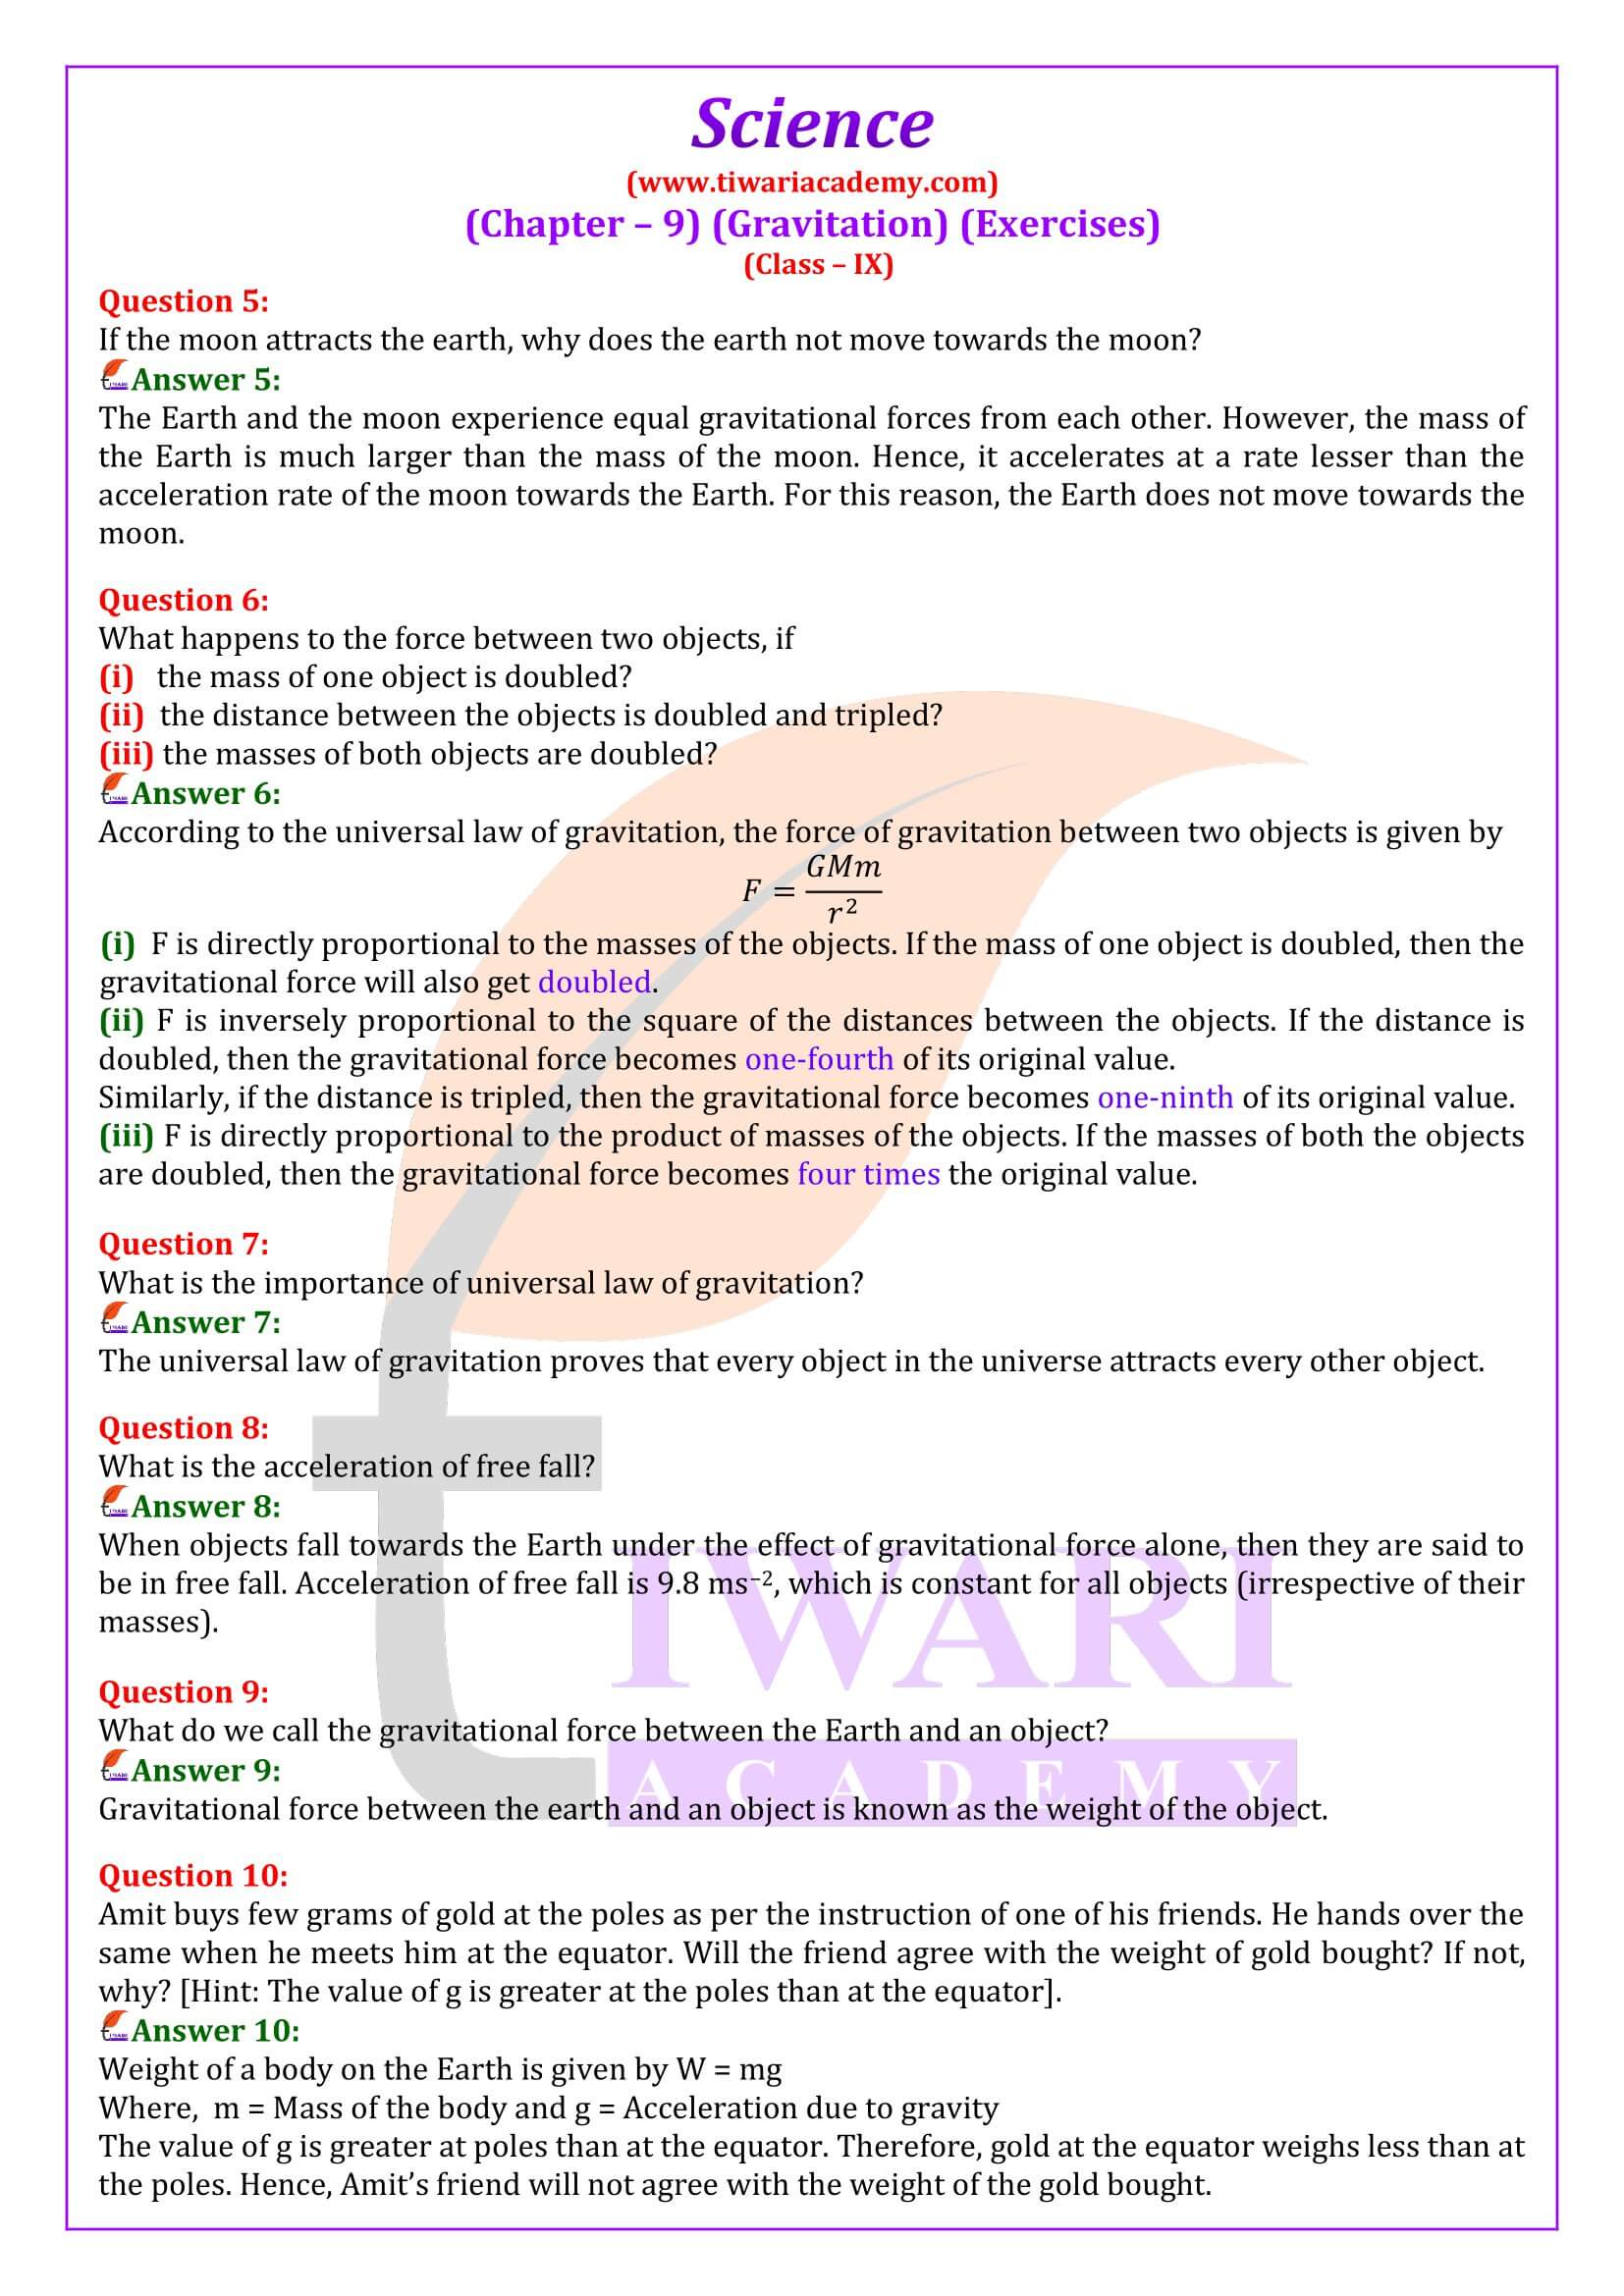 NCERT Solutions for Class 9 Science Chapter 9